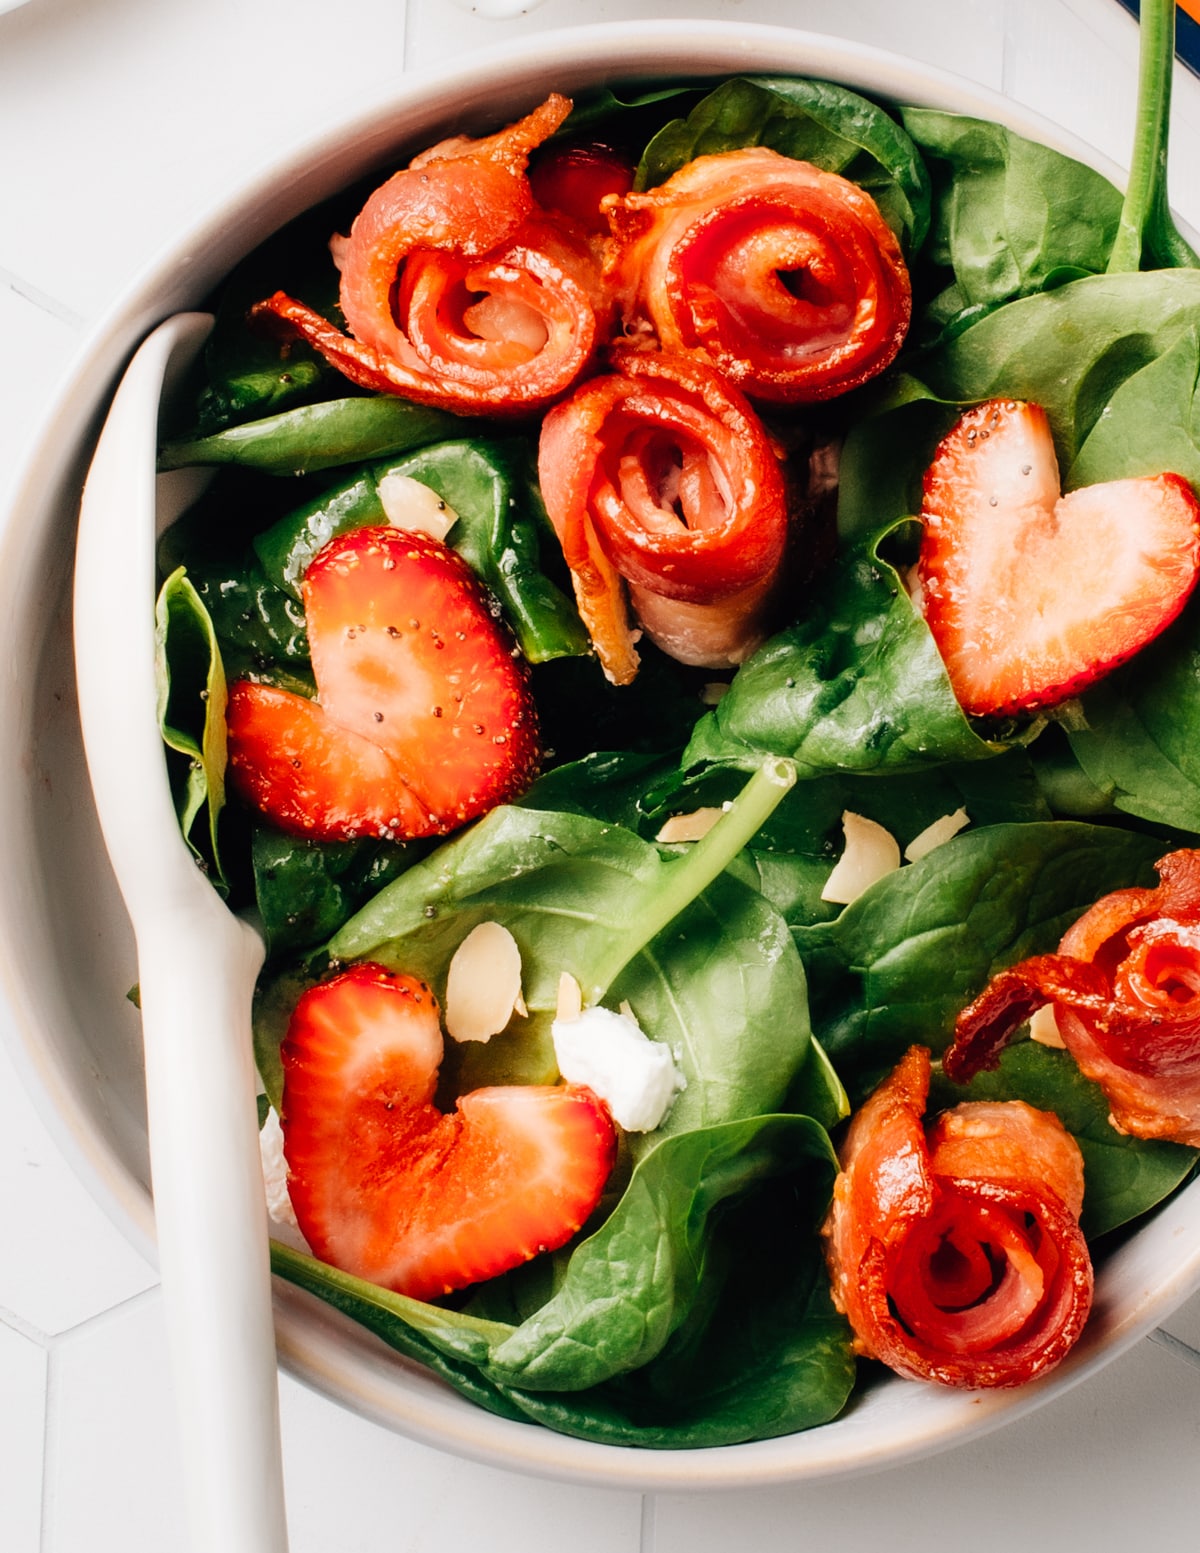 Spinach salad topped with strawberries and air fryer bacon.